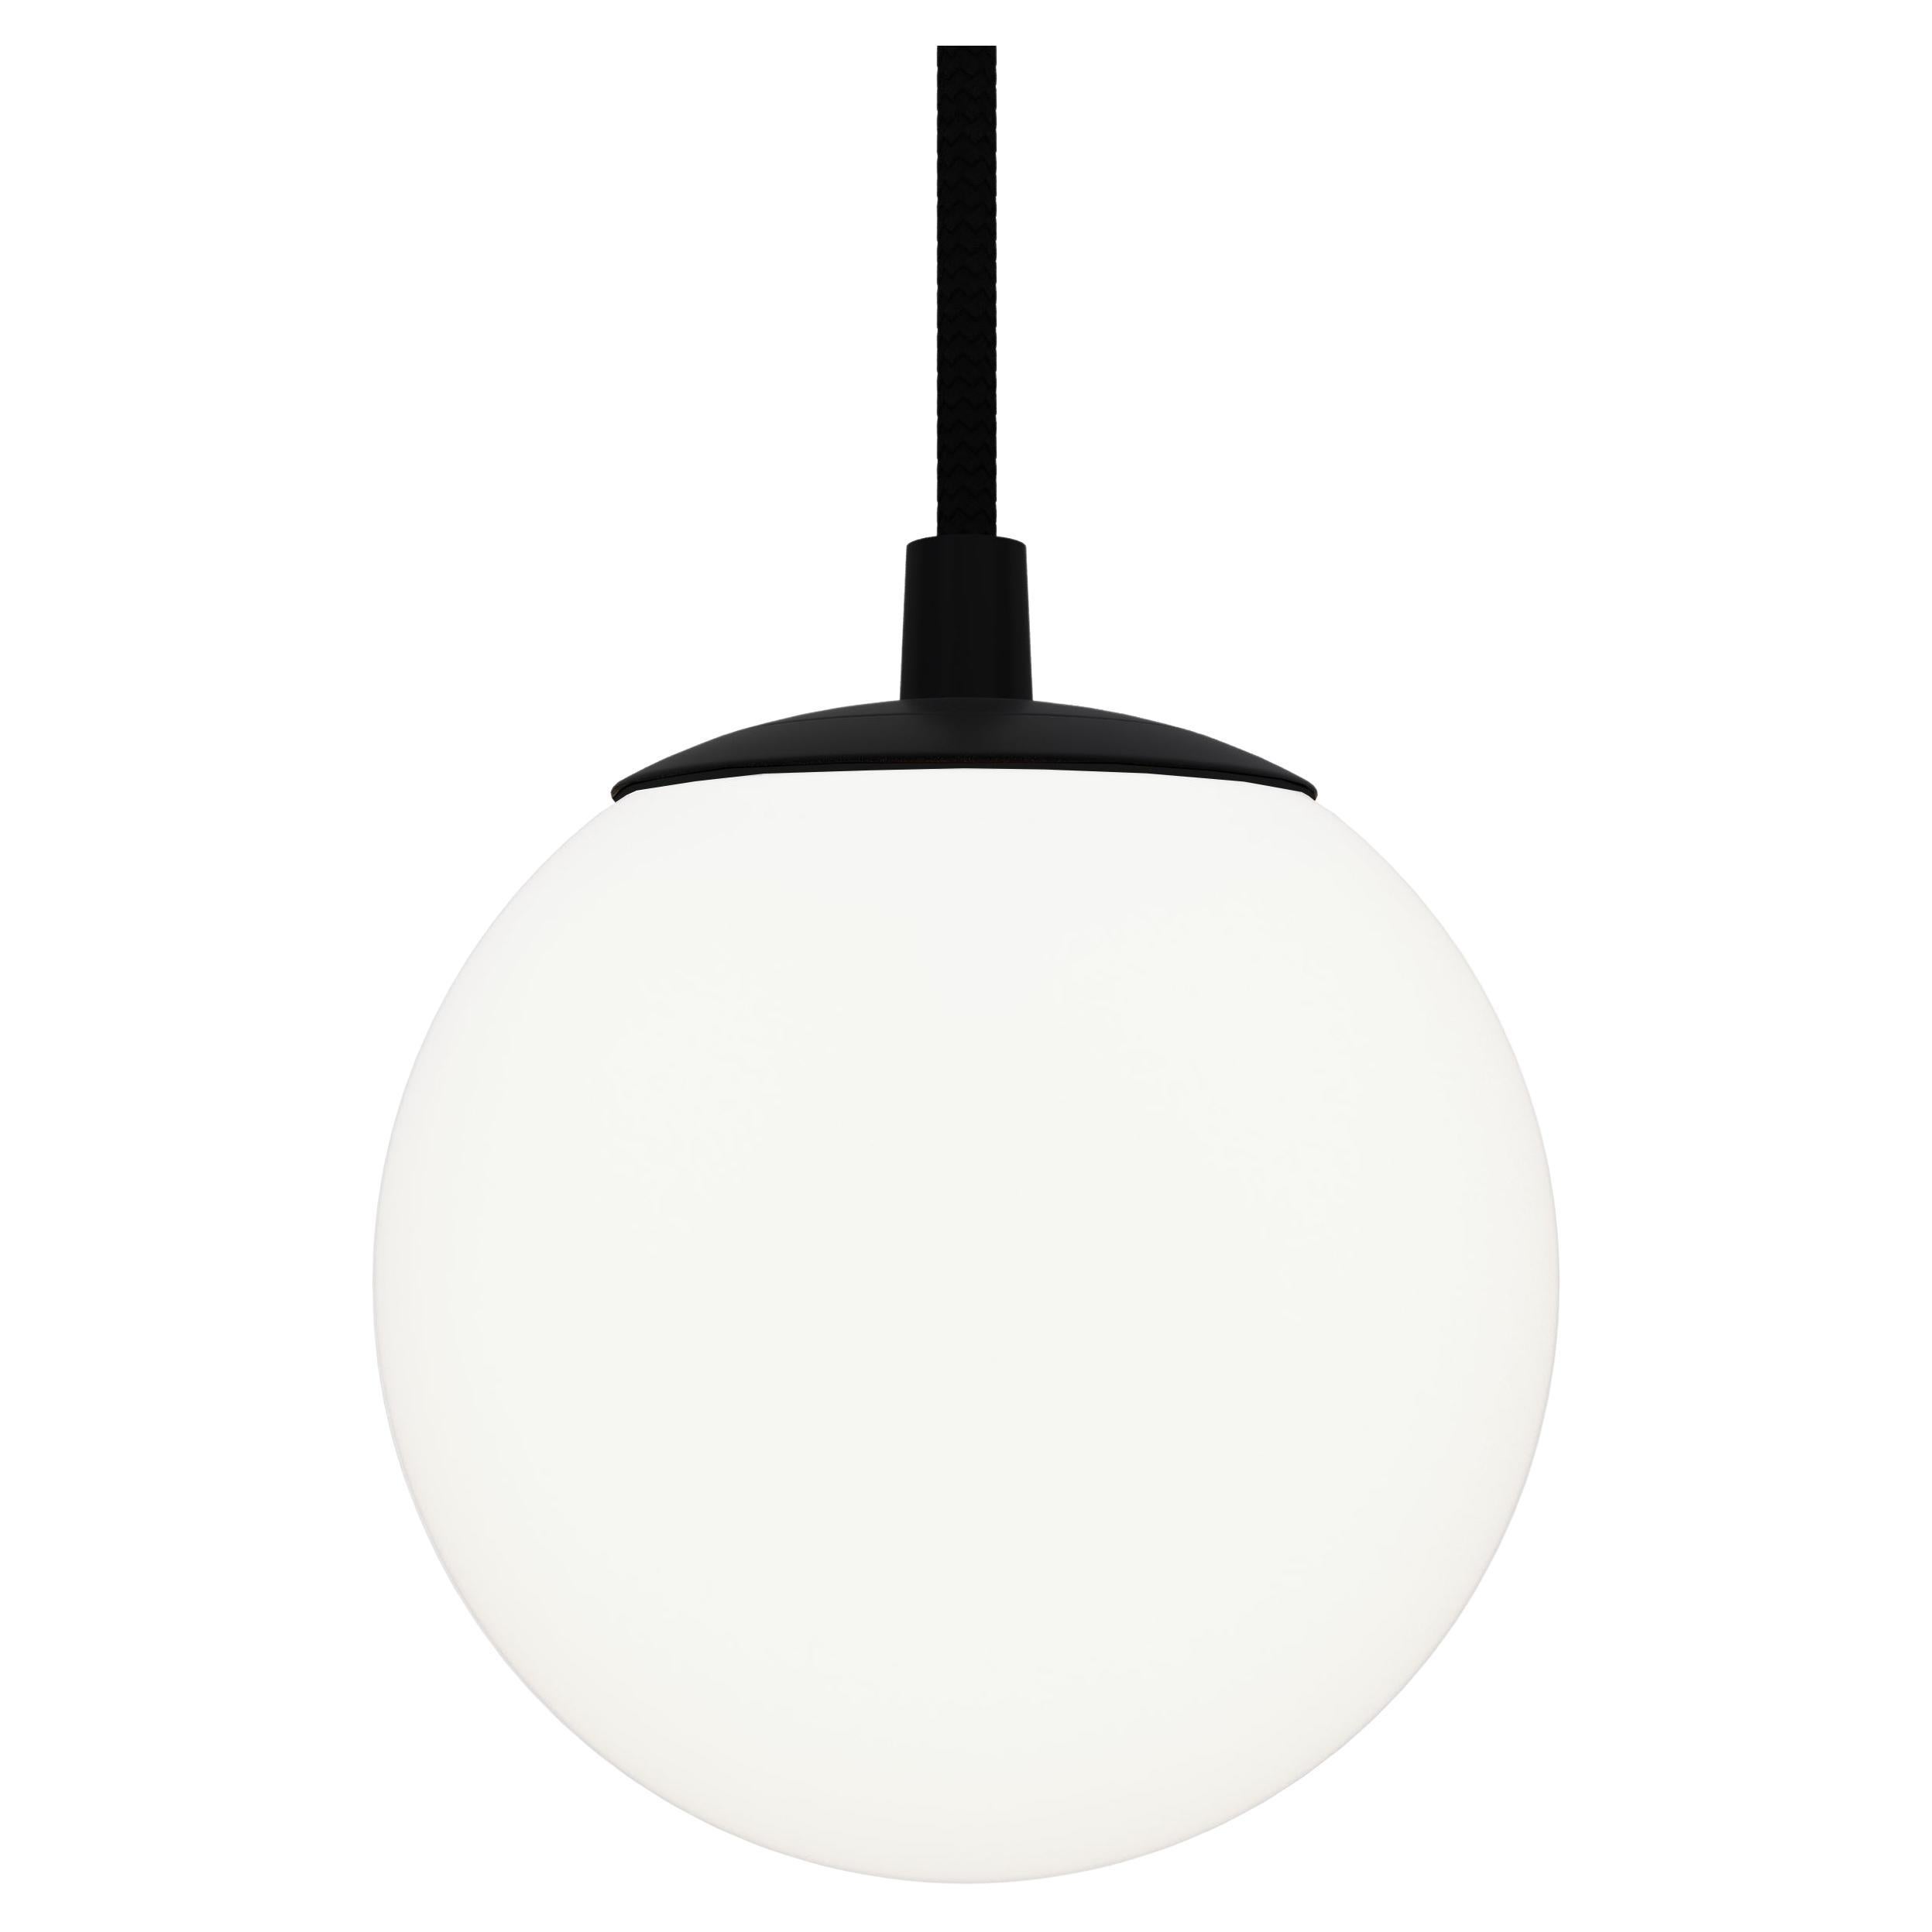 Category: Lighting
Type: pendant
Material: frosted glass, textile cable
Light source: G9, 110-220V
Available in different colors according to RAL classic.
